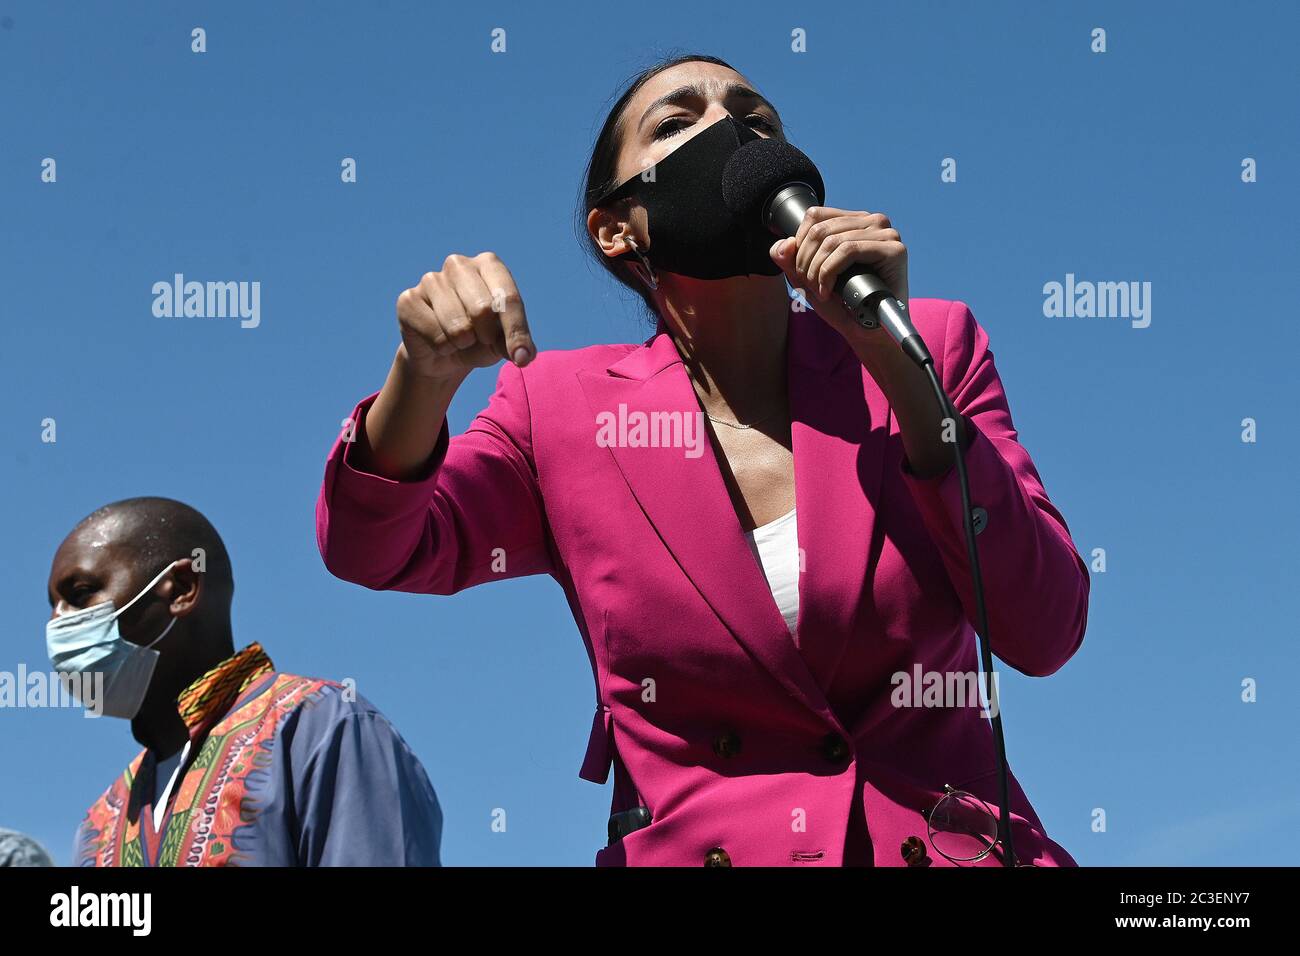 Wearing a mask in the time of COVID-19, U.S. Representative Alexandria Ocasio-Cortez (purple) speaks at a Juneteenth celebration rally in front of the Unisphere in Flushing Meadows-Corona Park in the borough of Queens, New York, June 19, 2020. Juneteenth is celebrated as a commemoration of the ending of slavery in the United States. Credit: Sipa USA/Alamy Live News Stock Photo